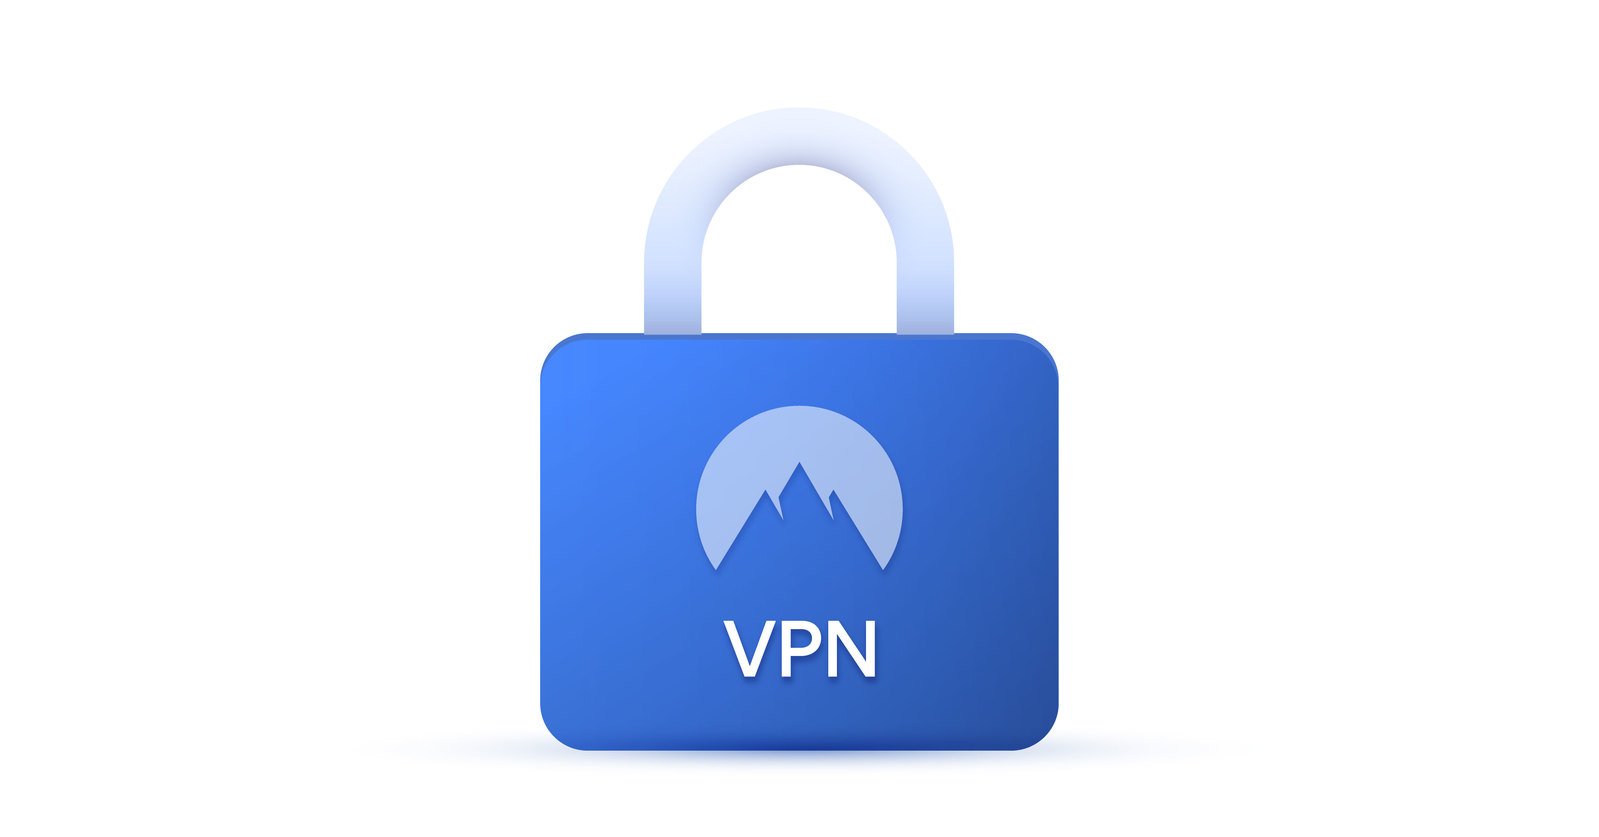 The problem with VPN's